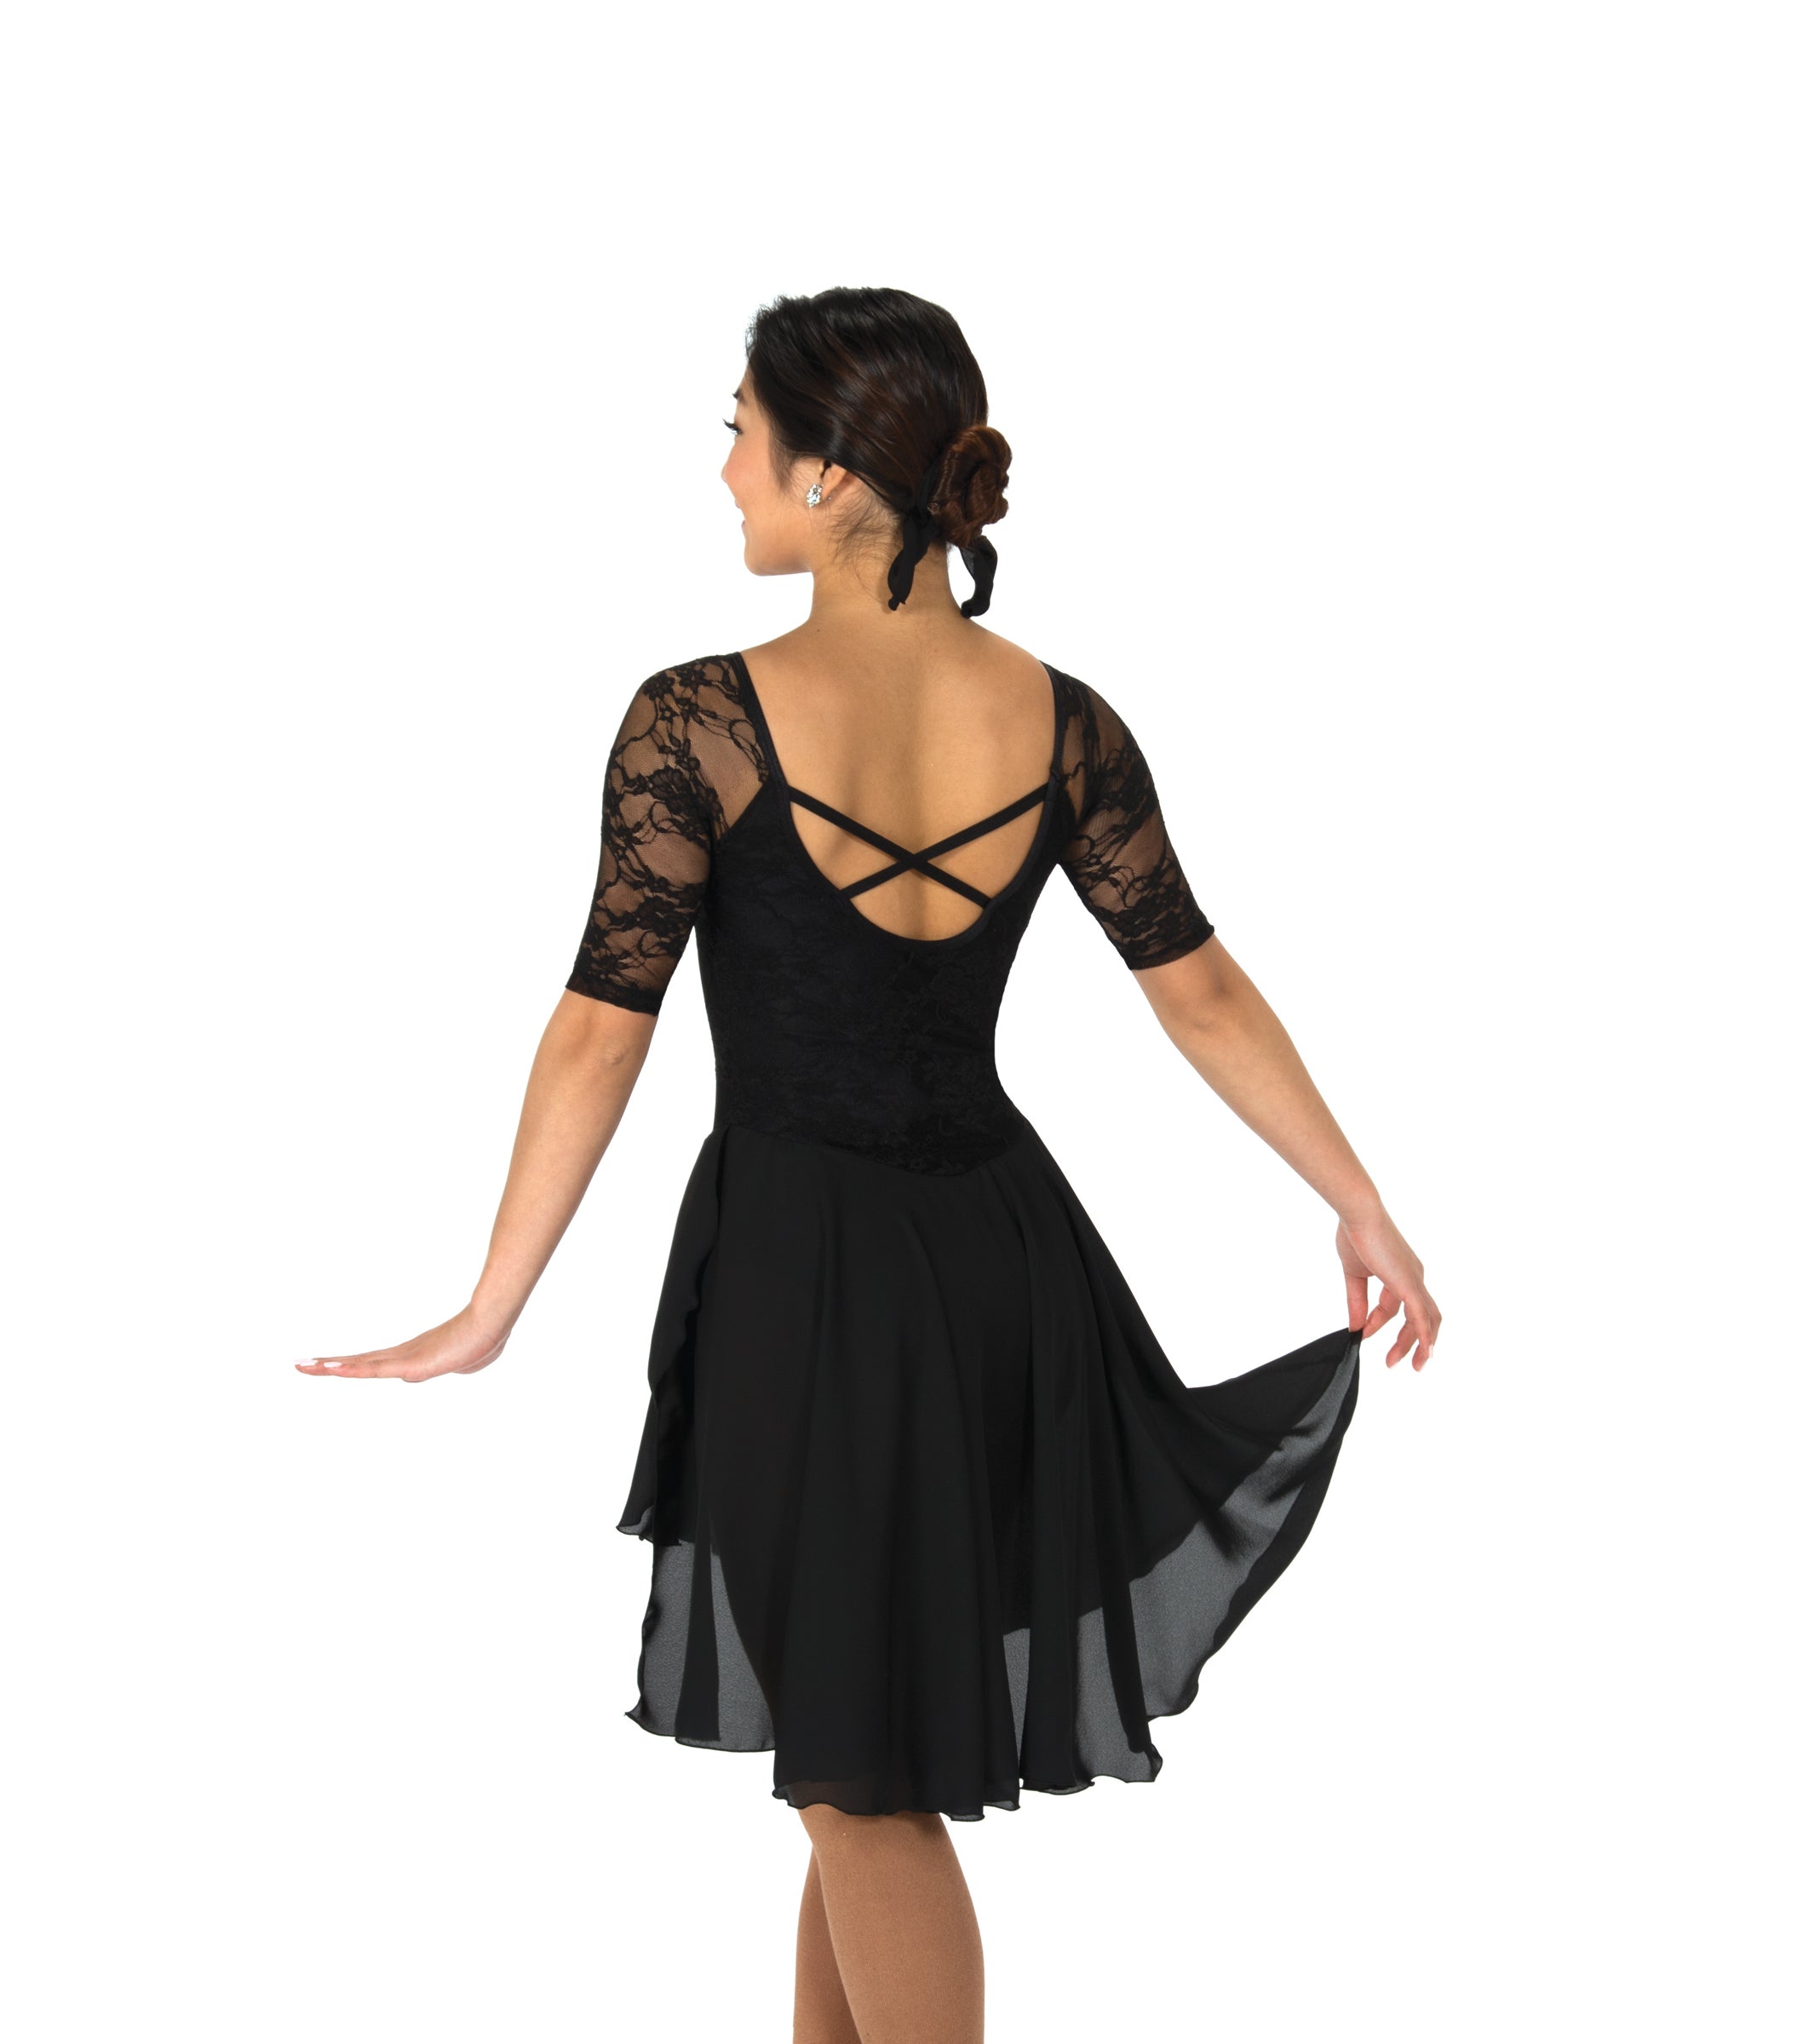 95 Classic Lace Dance Dress in Black by Jerry's